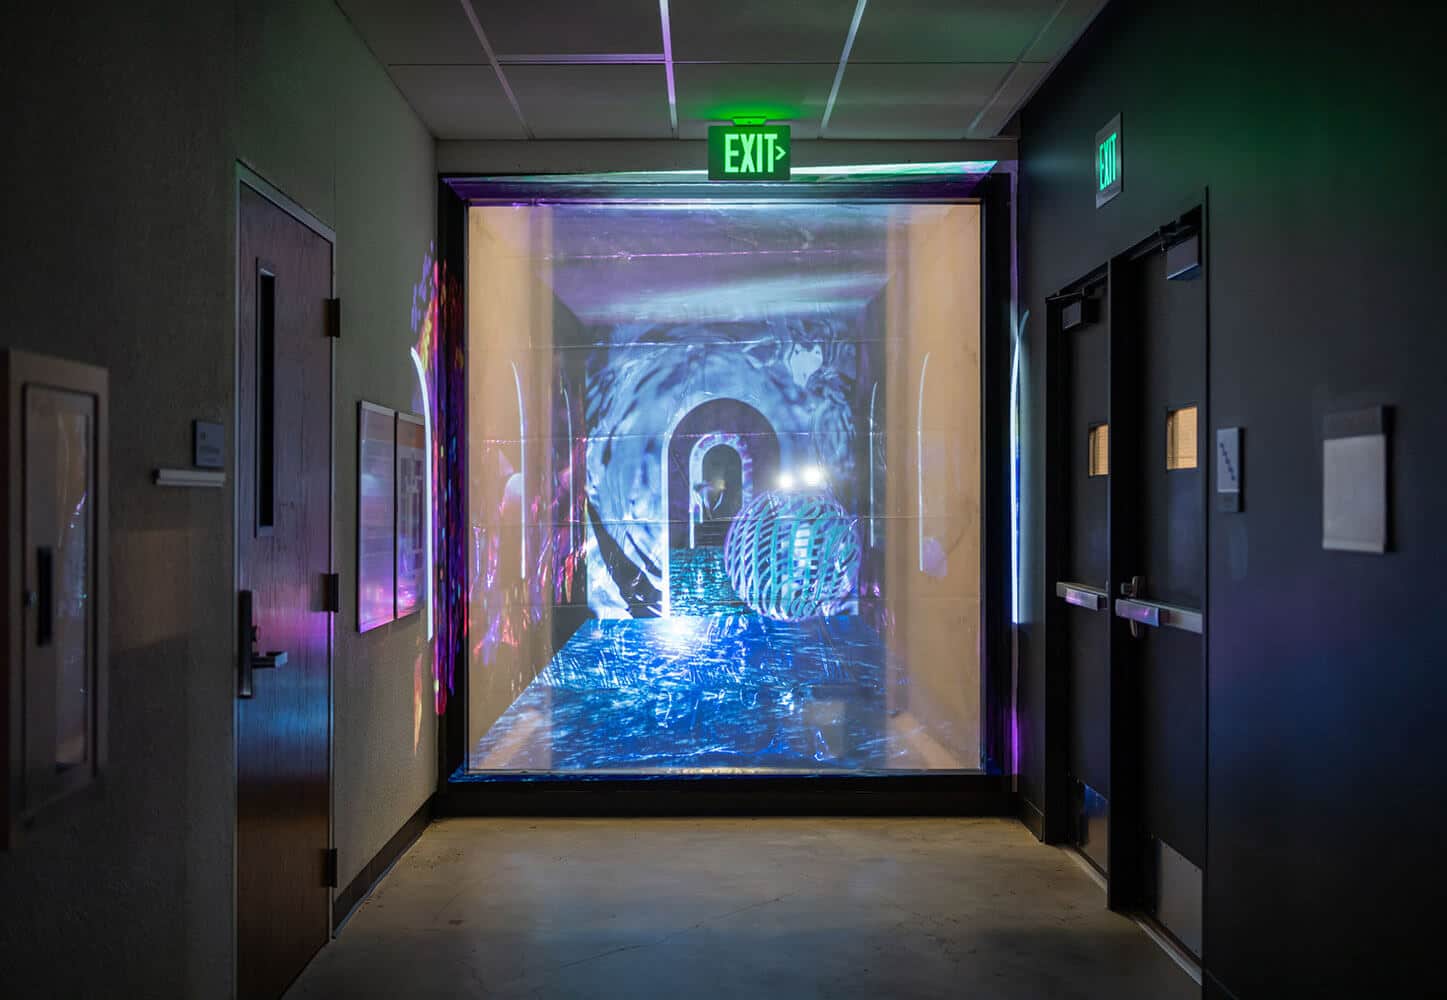 At the end of a hallway, a video is projected onto a floor-to-ceiling scrim. The video depicts an arched doorway in a blue, fragmented atmosphere.